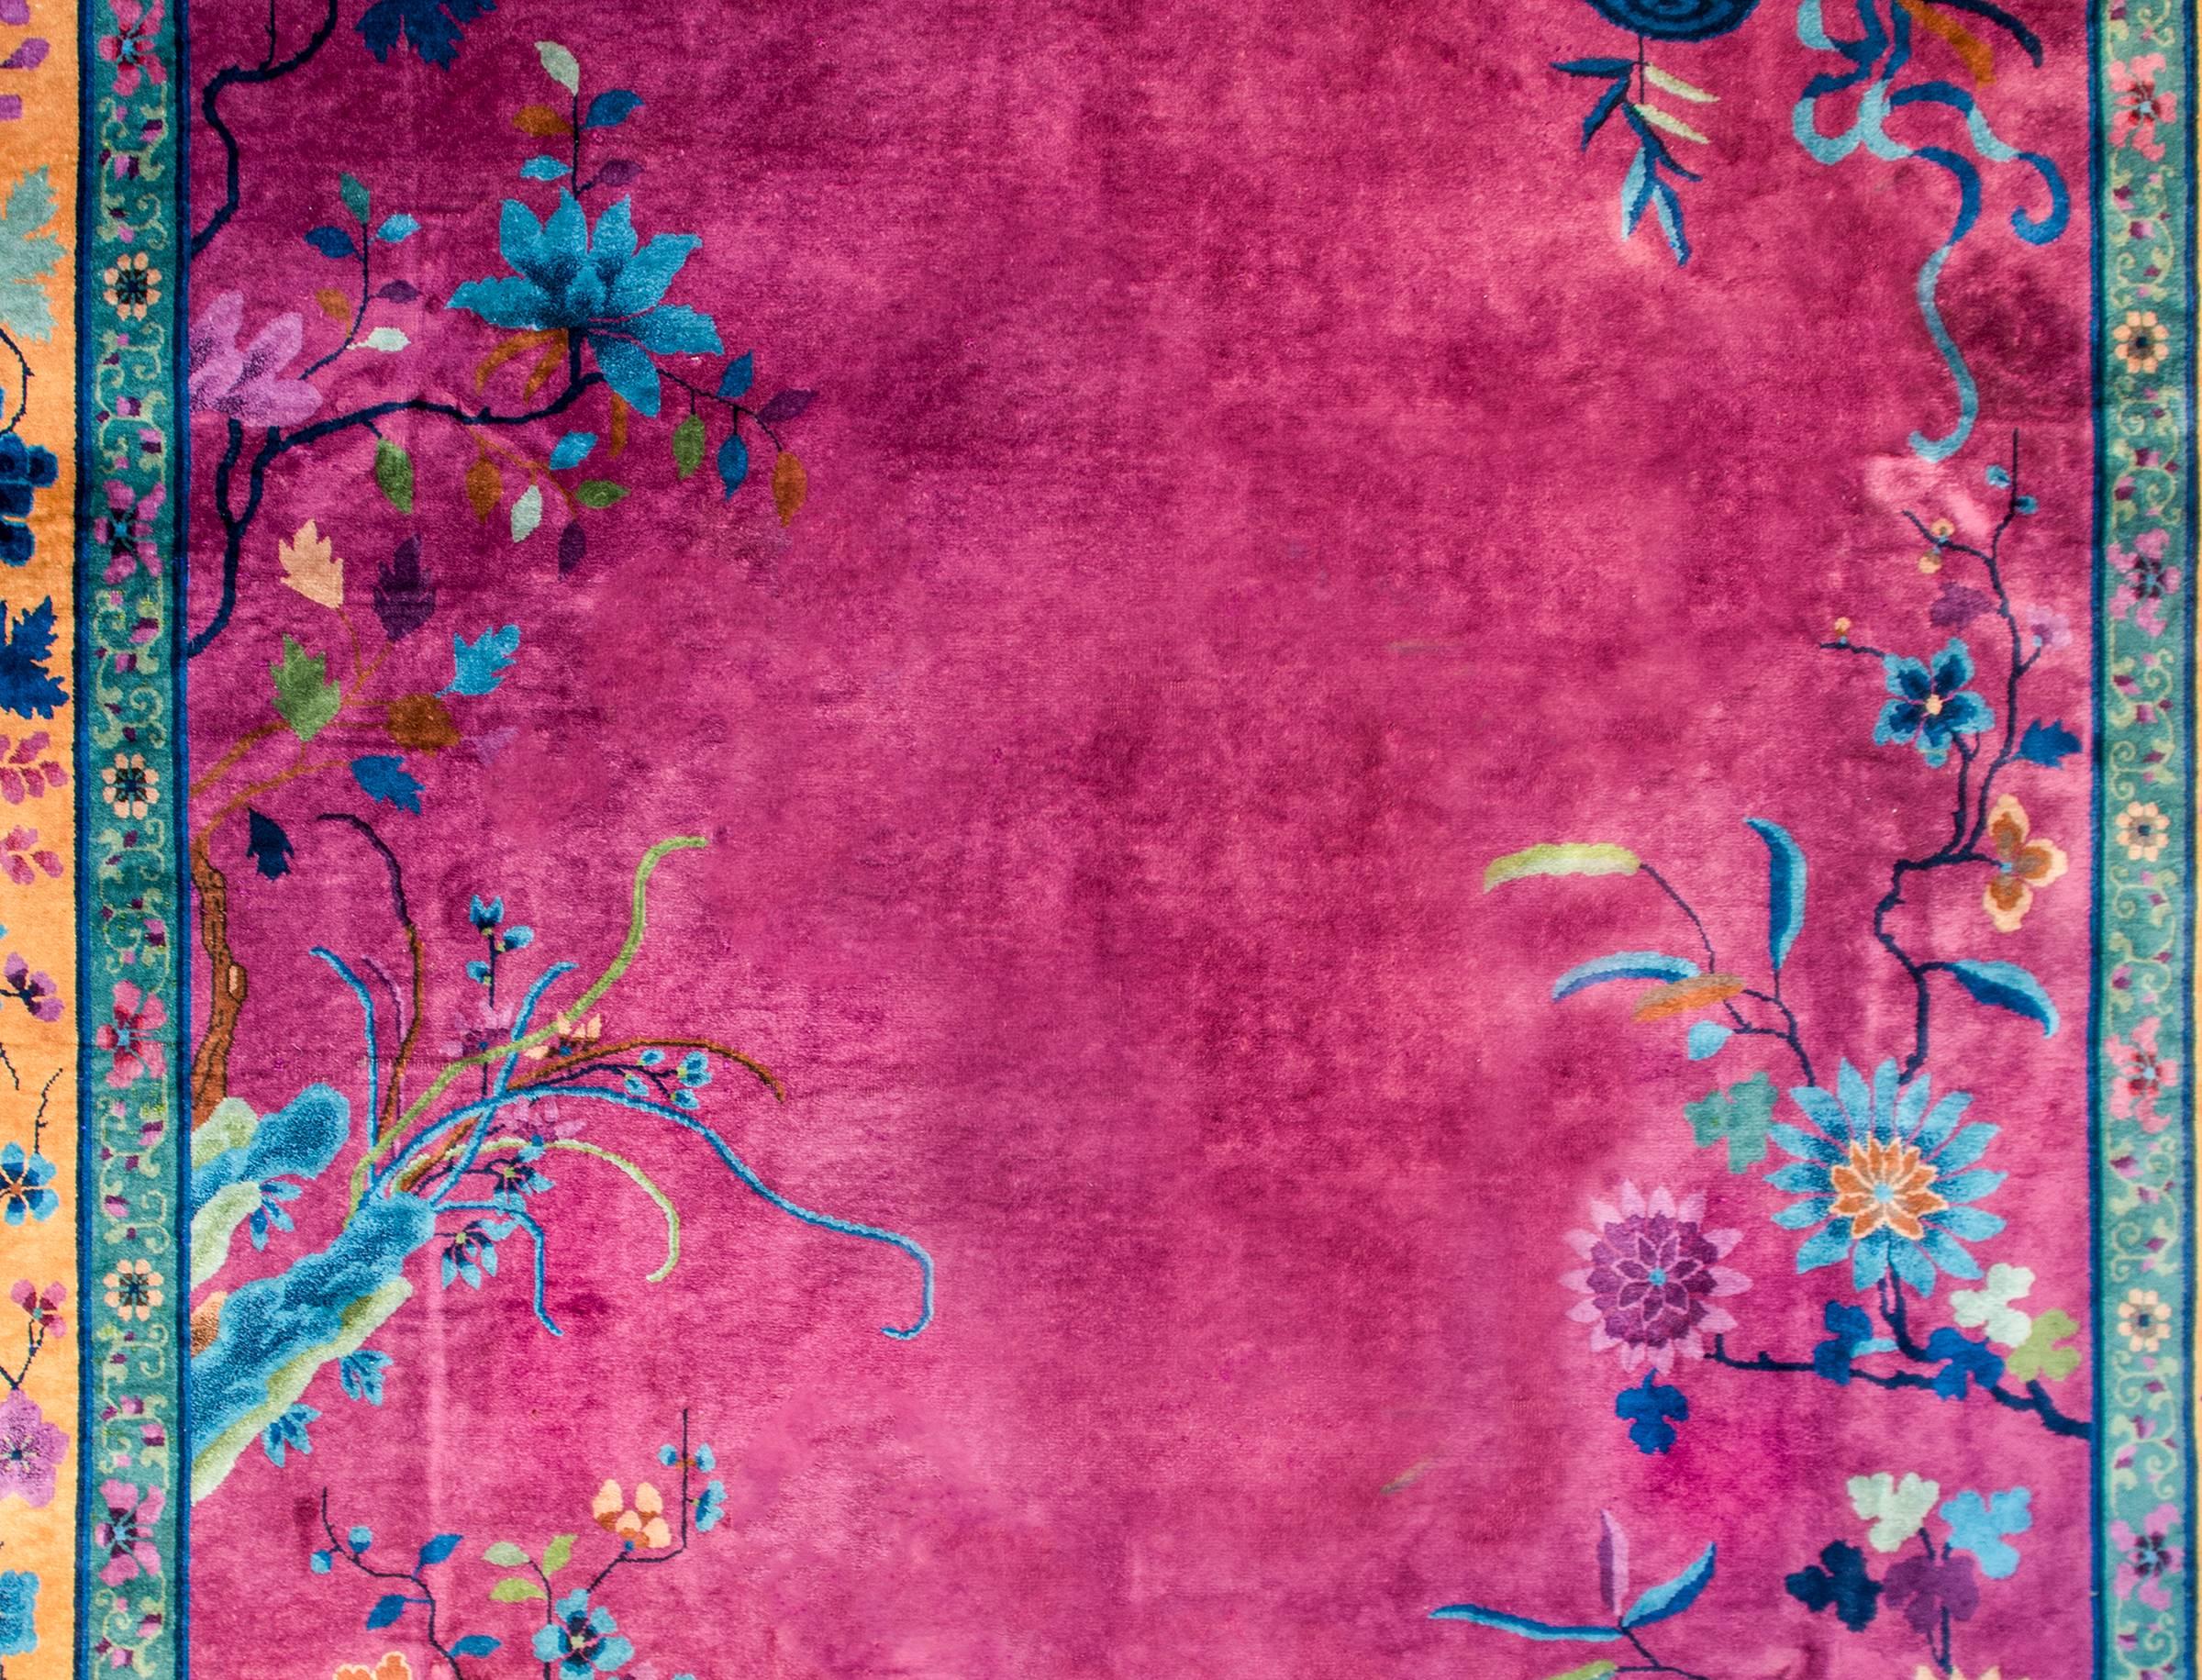 Wonderful early 20th century Chinese Art Deco rug with a brilliant fuchsia field surrounded by a thin turquoise border with a petite floral and vine pattern, and a wide peach colored border, also with a large-scale floral and vine pattern, and a